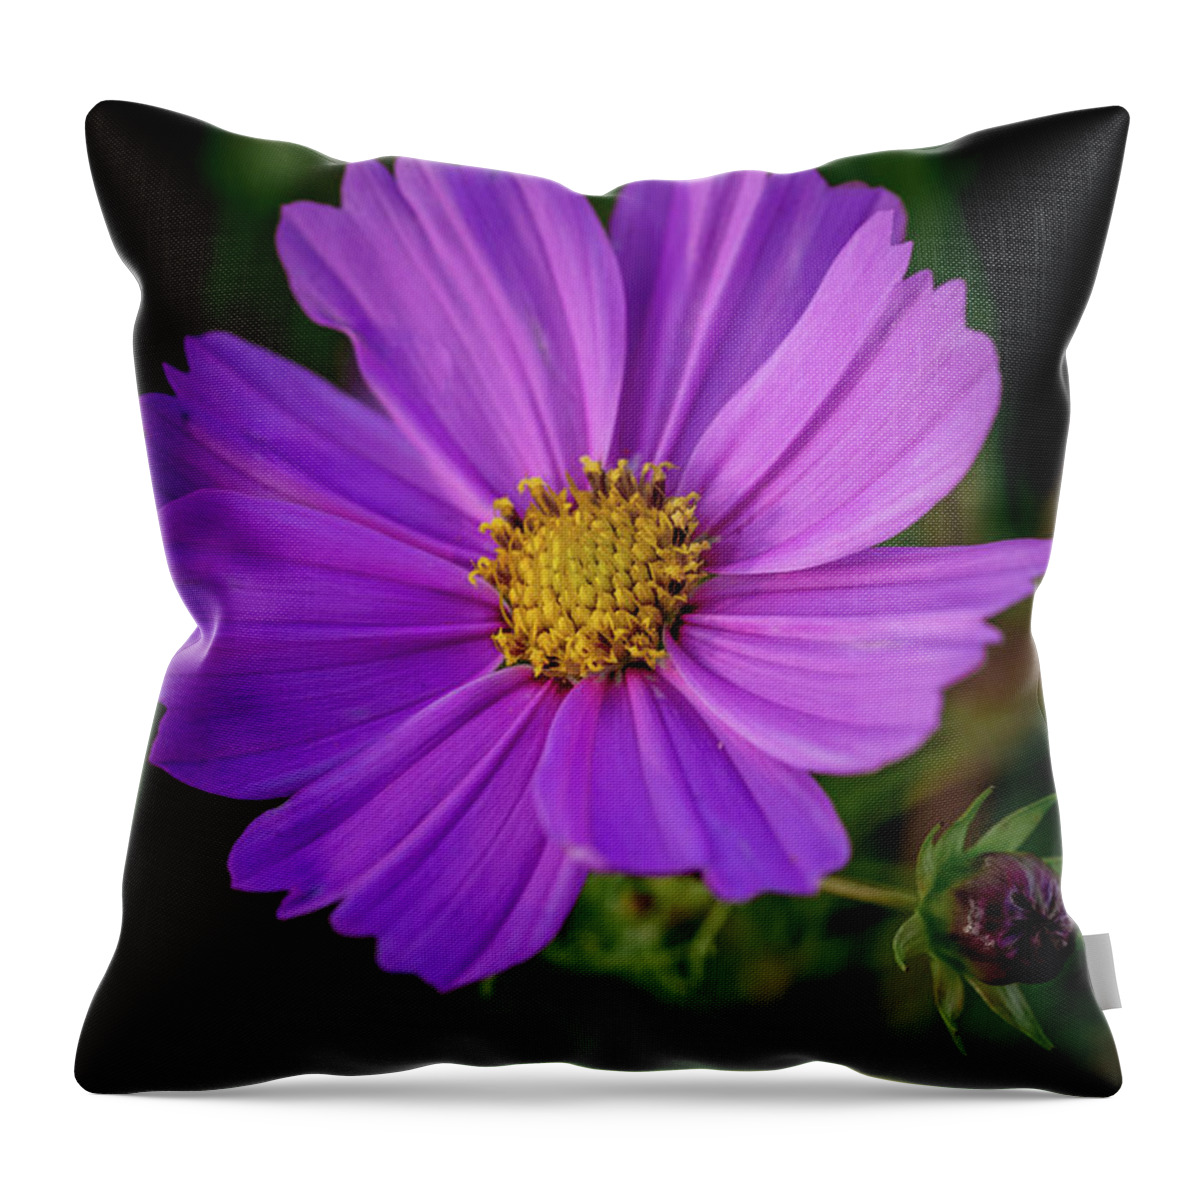 Flower Throw Pillow featuring the photograph Symmetrical Pedals by Aaron Burrows